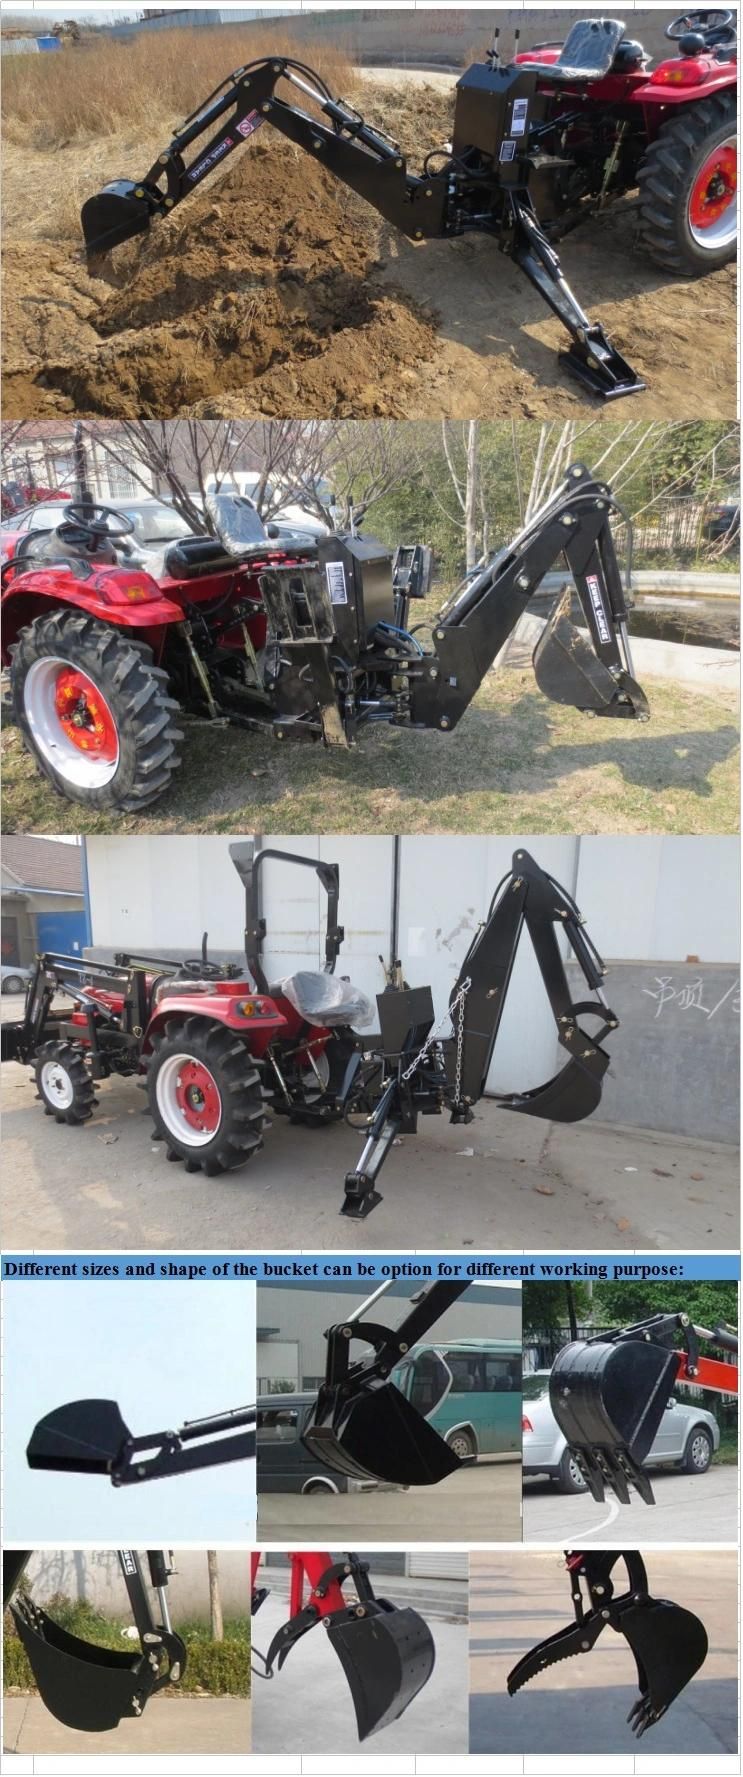 Chinese Mini Hydraulic Backhoe Loader with Thumb Attachment for Tractors